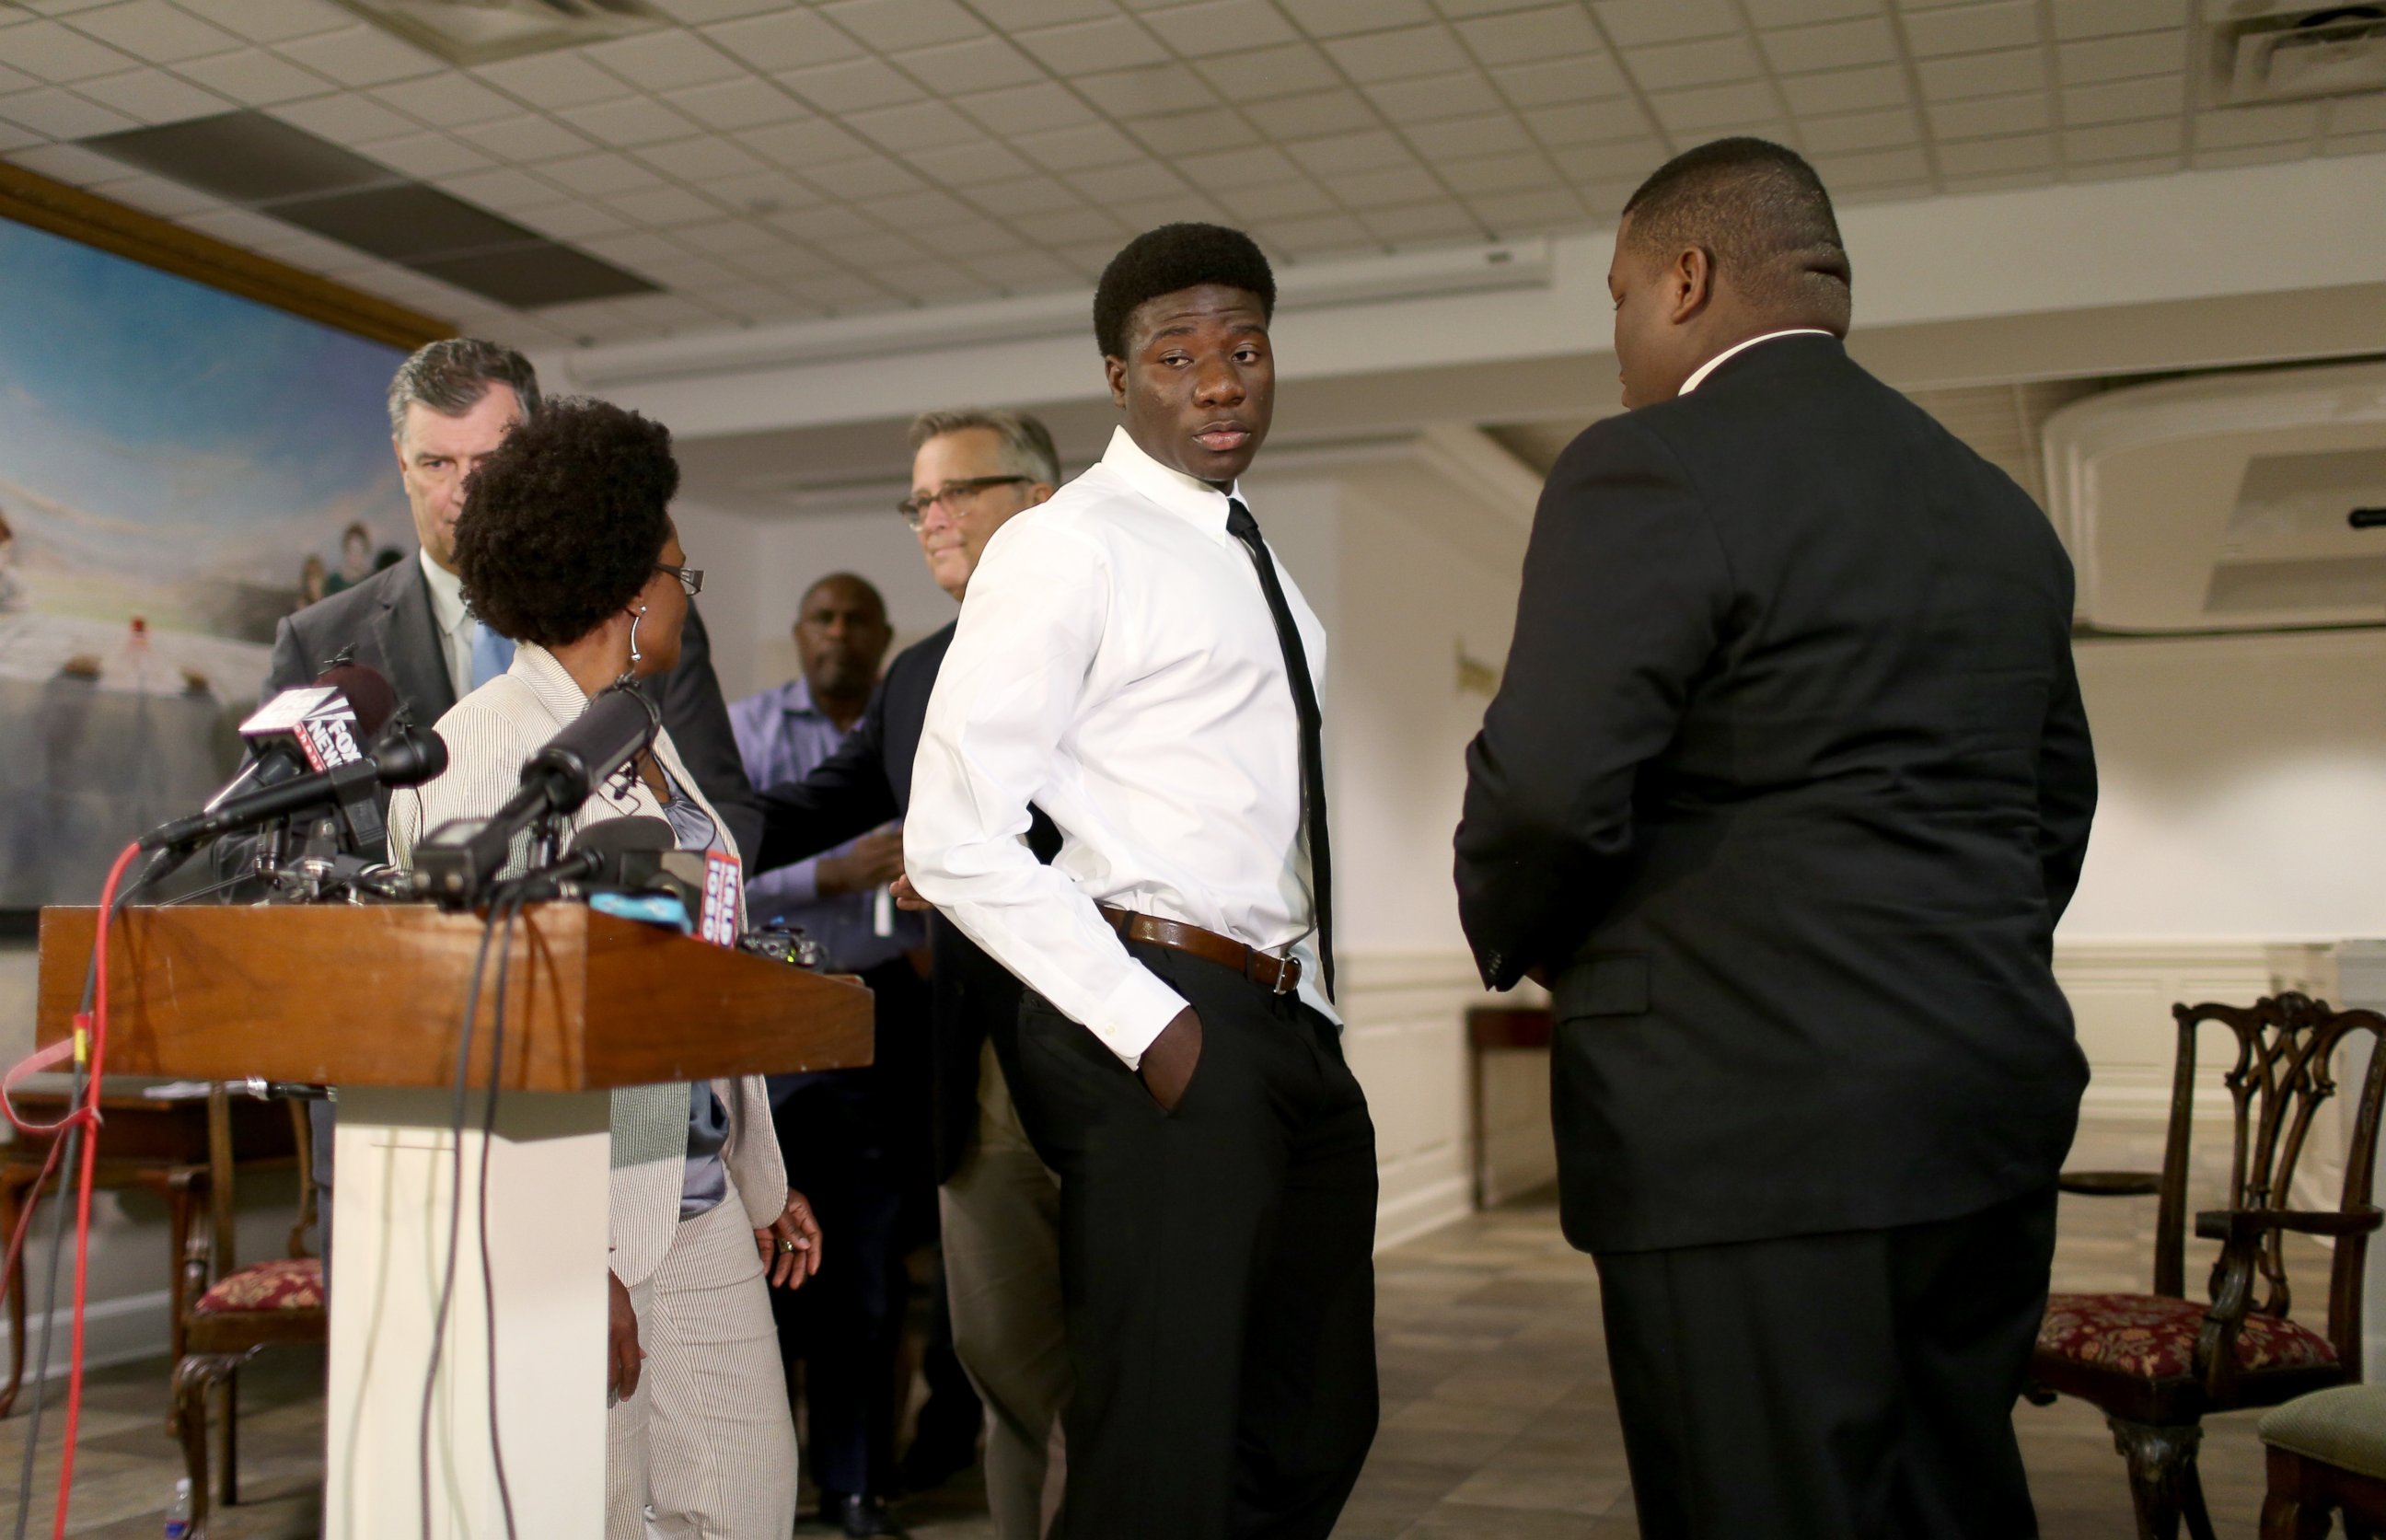 PHOTO: Karsiah Duncan, the son of Ebola victim Thomas Eric Duncan, leaves after speaking to the media at the Wilshire Baptist Church on Oct. 7, 2014 in Dallas, Texas.